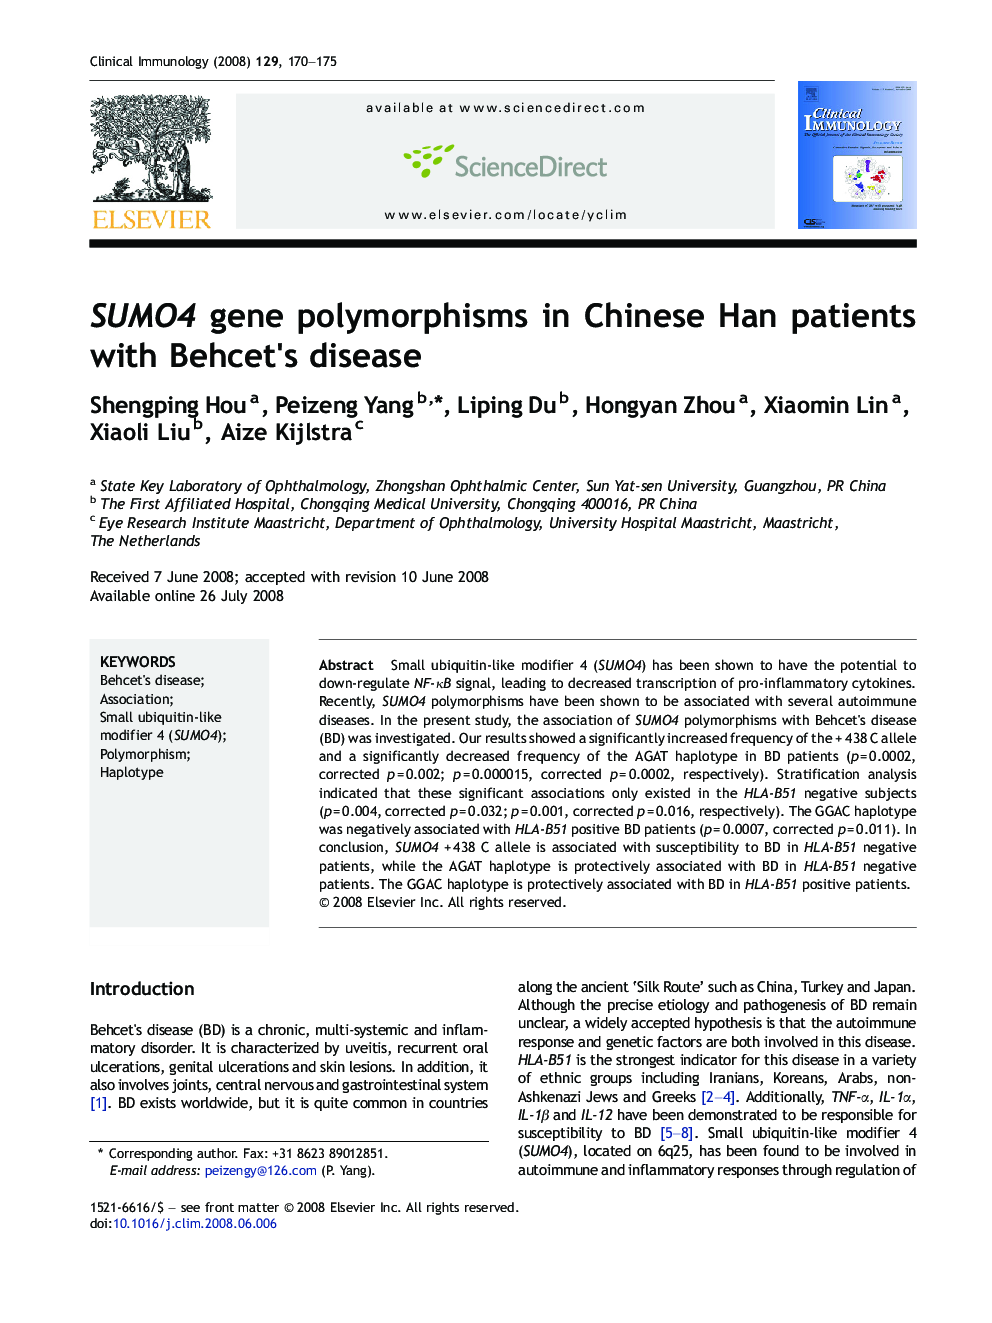 SUMO4 gene polymorphisms in Chinese Han patients with Behcet's disease